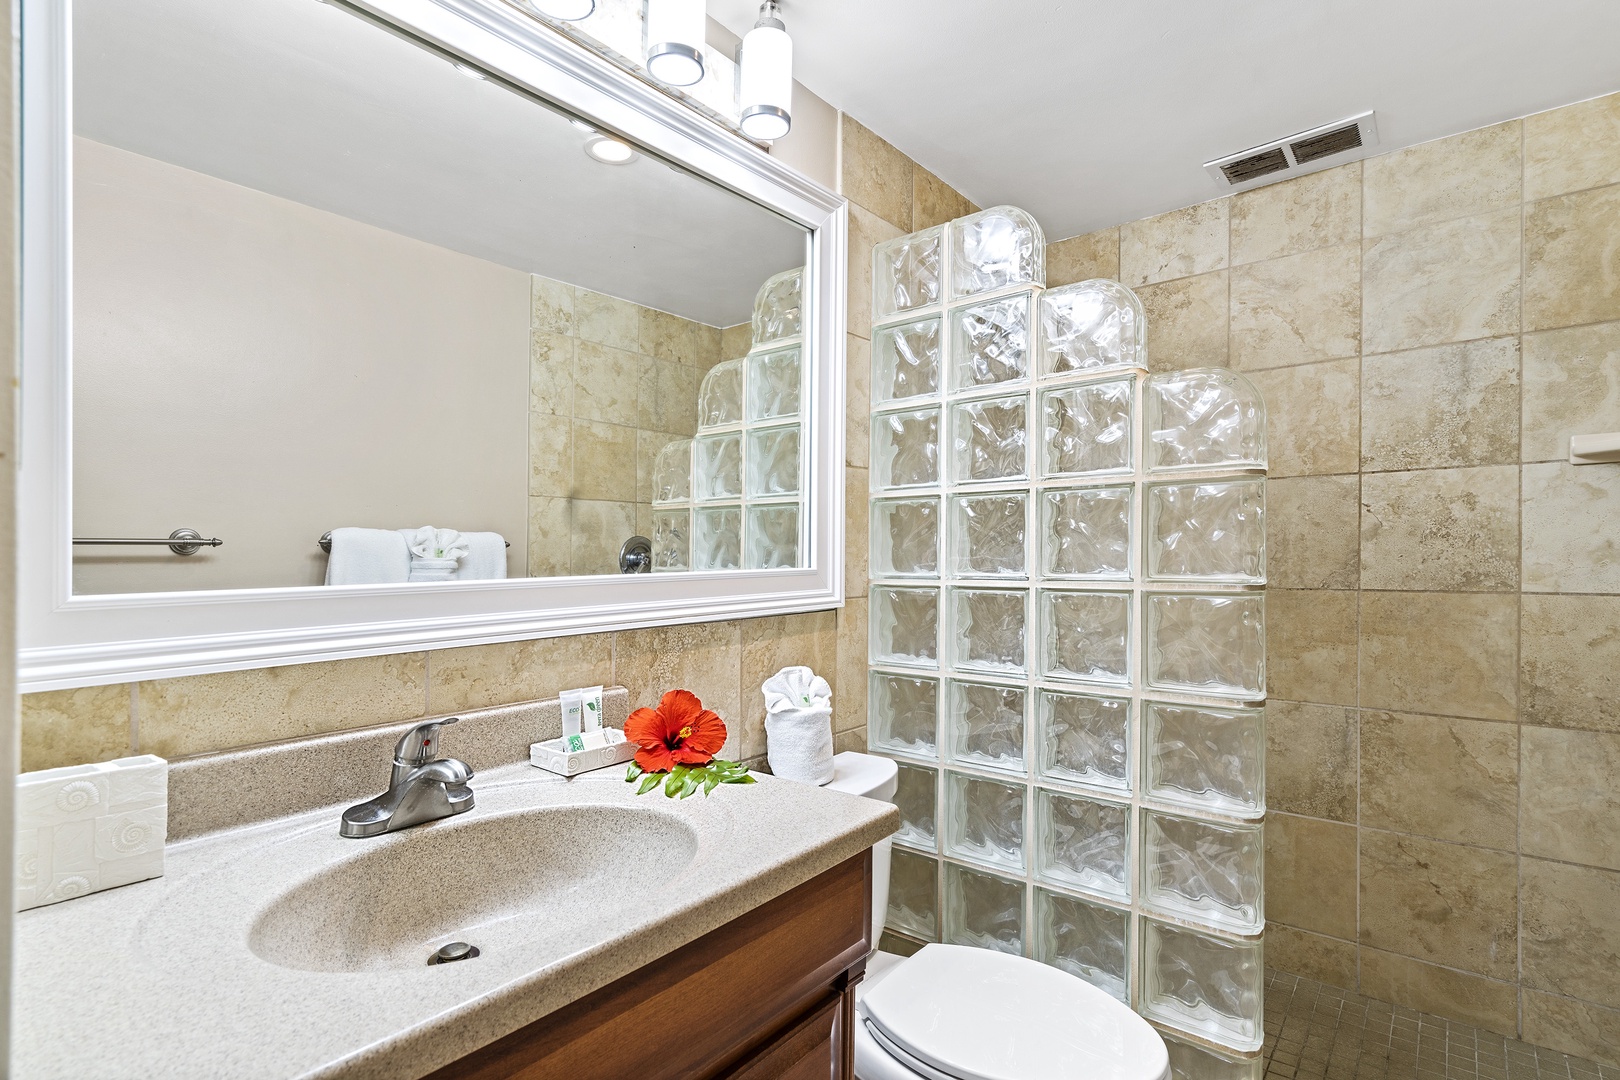 Kailua Kona Vacation Rentals, Sea Village 1105 - Attached primary bathroom with walk in shower